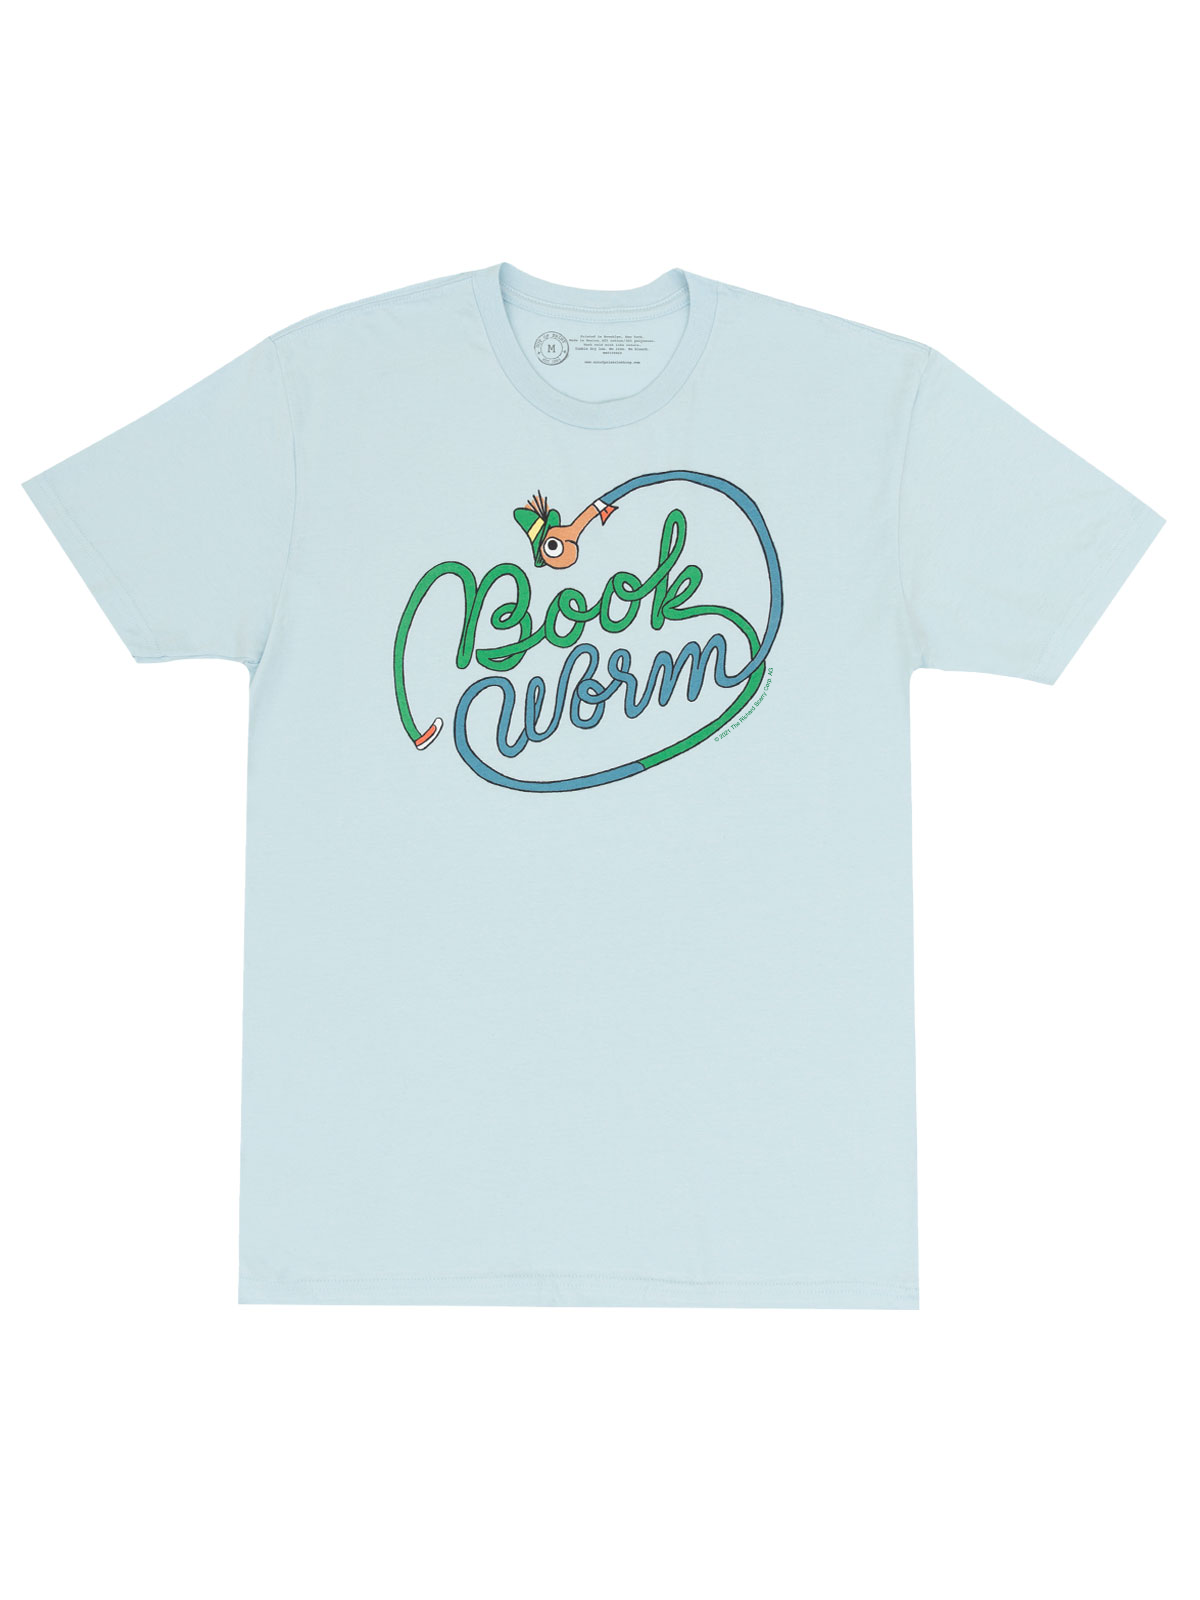 Richard Scarry Bookworm unisex book t-shirt — Out of Print